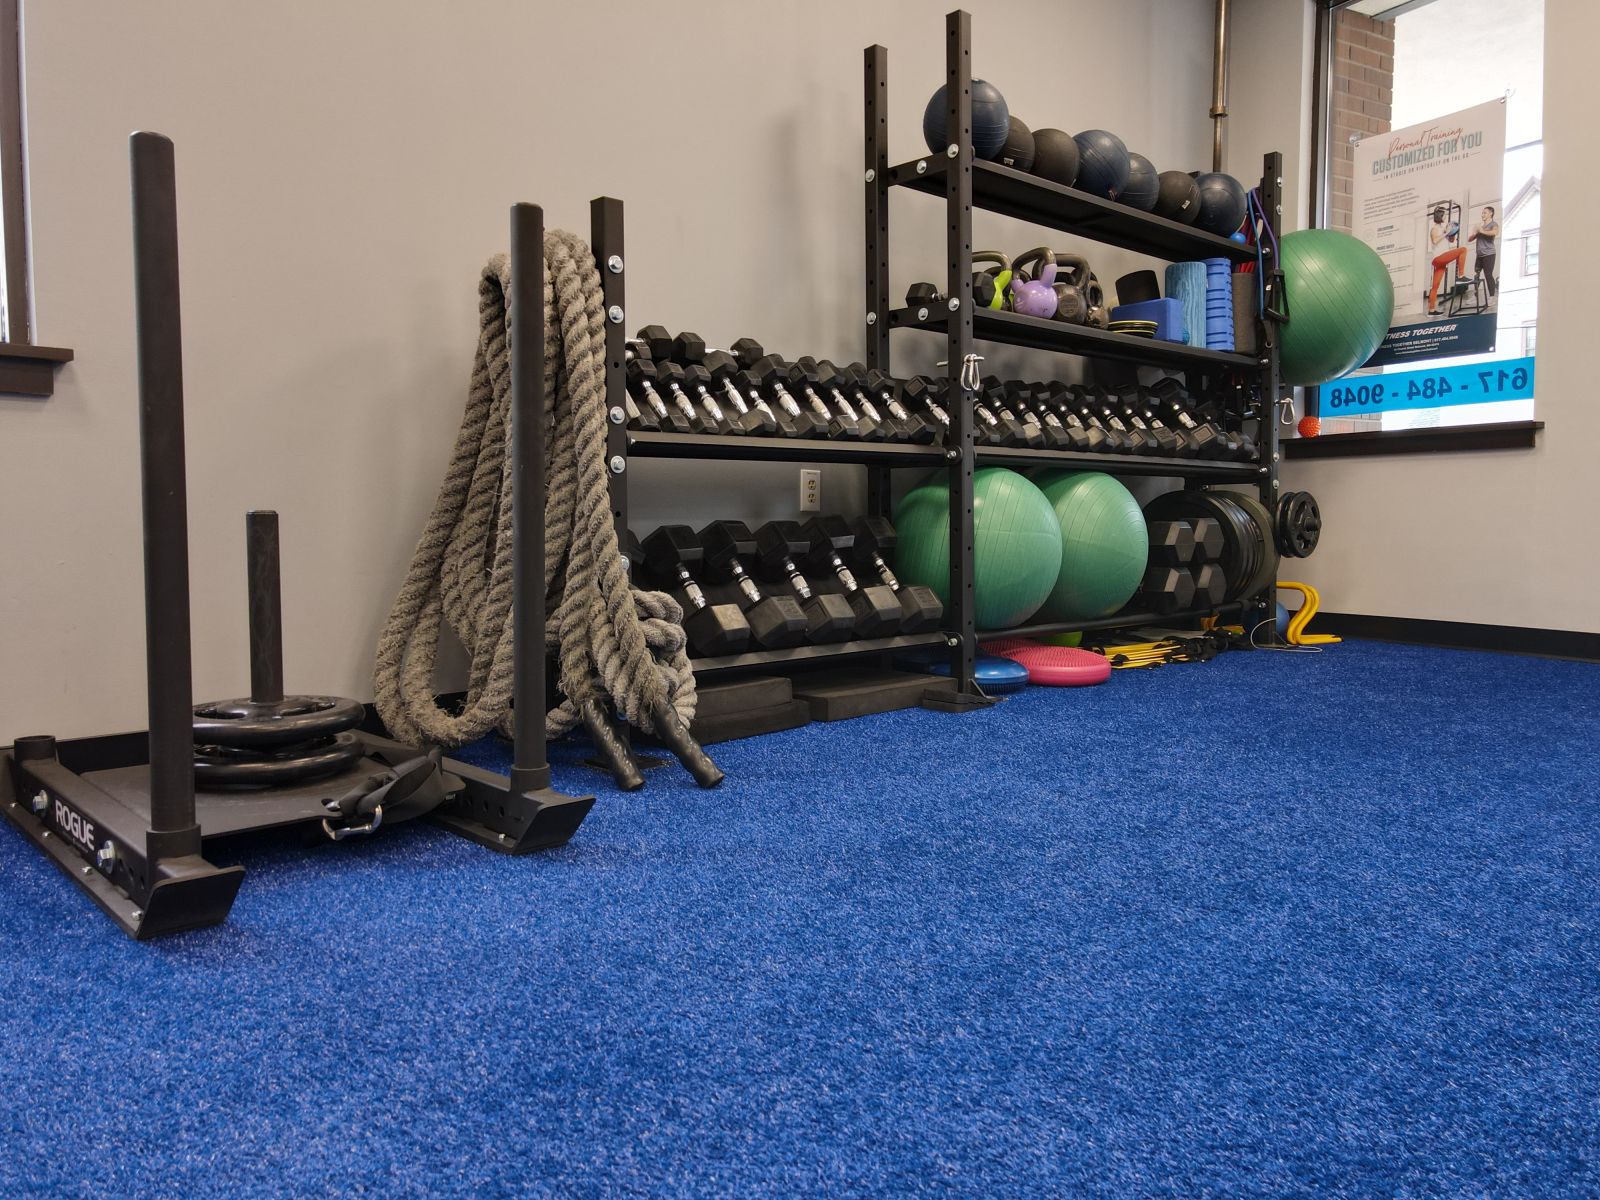 rope, dumbbells, and other equipment